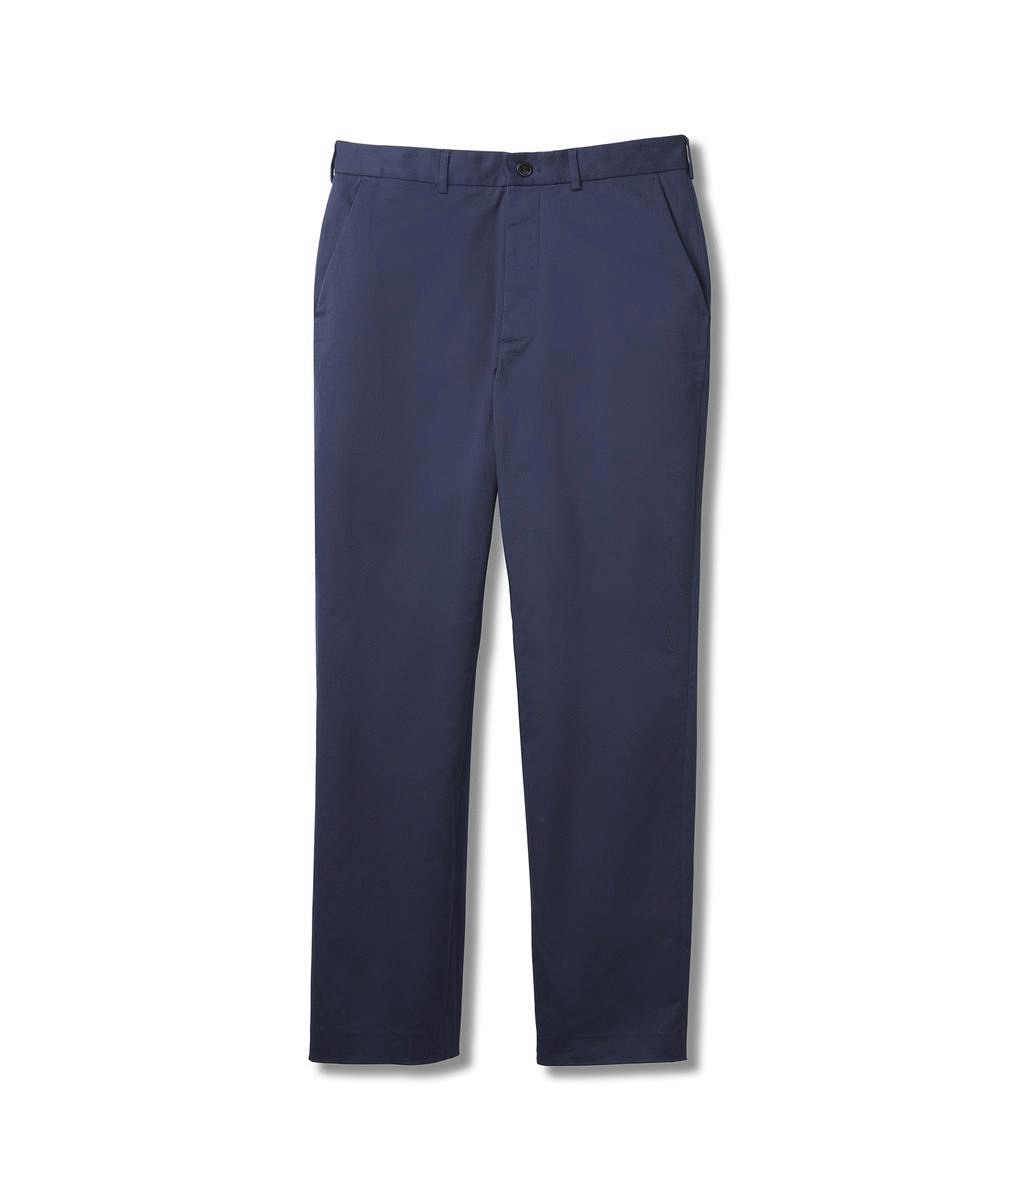 Solid ‘Fordham’ Flat Front Easy-Care Chino Twill Pant with Magnetic Closures in Navy